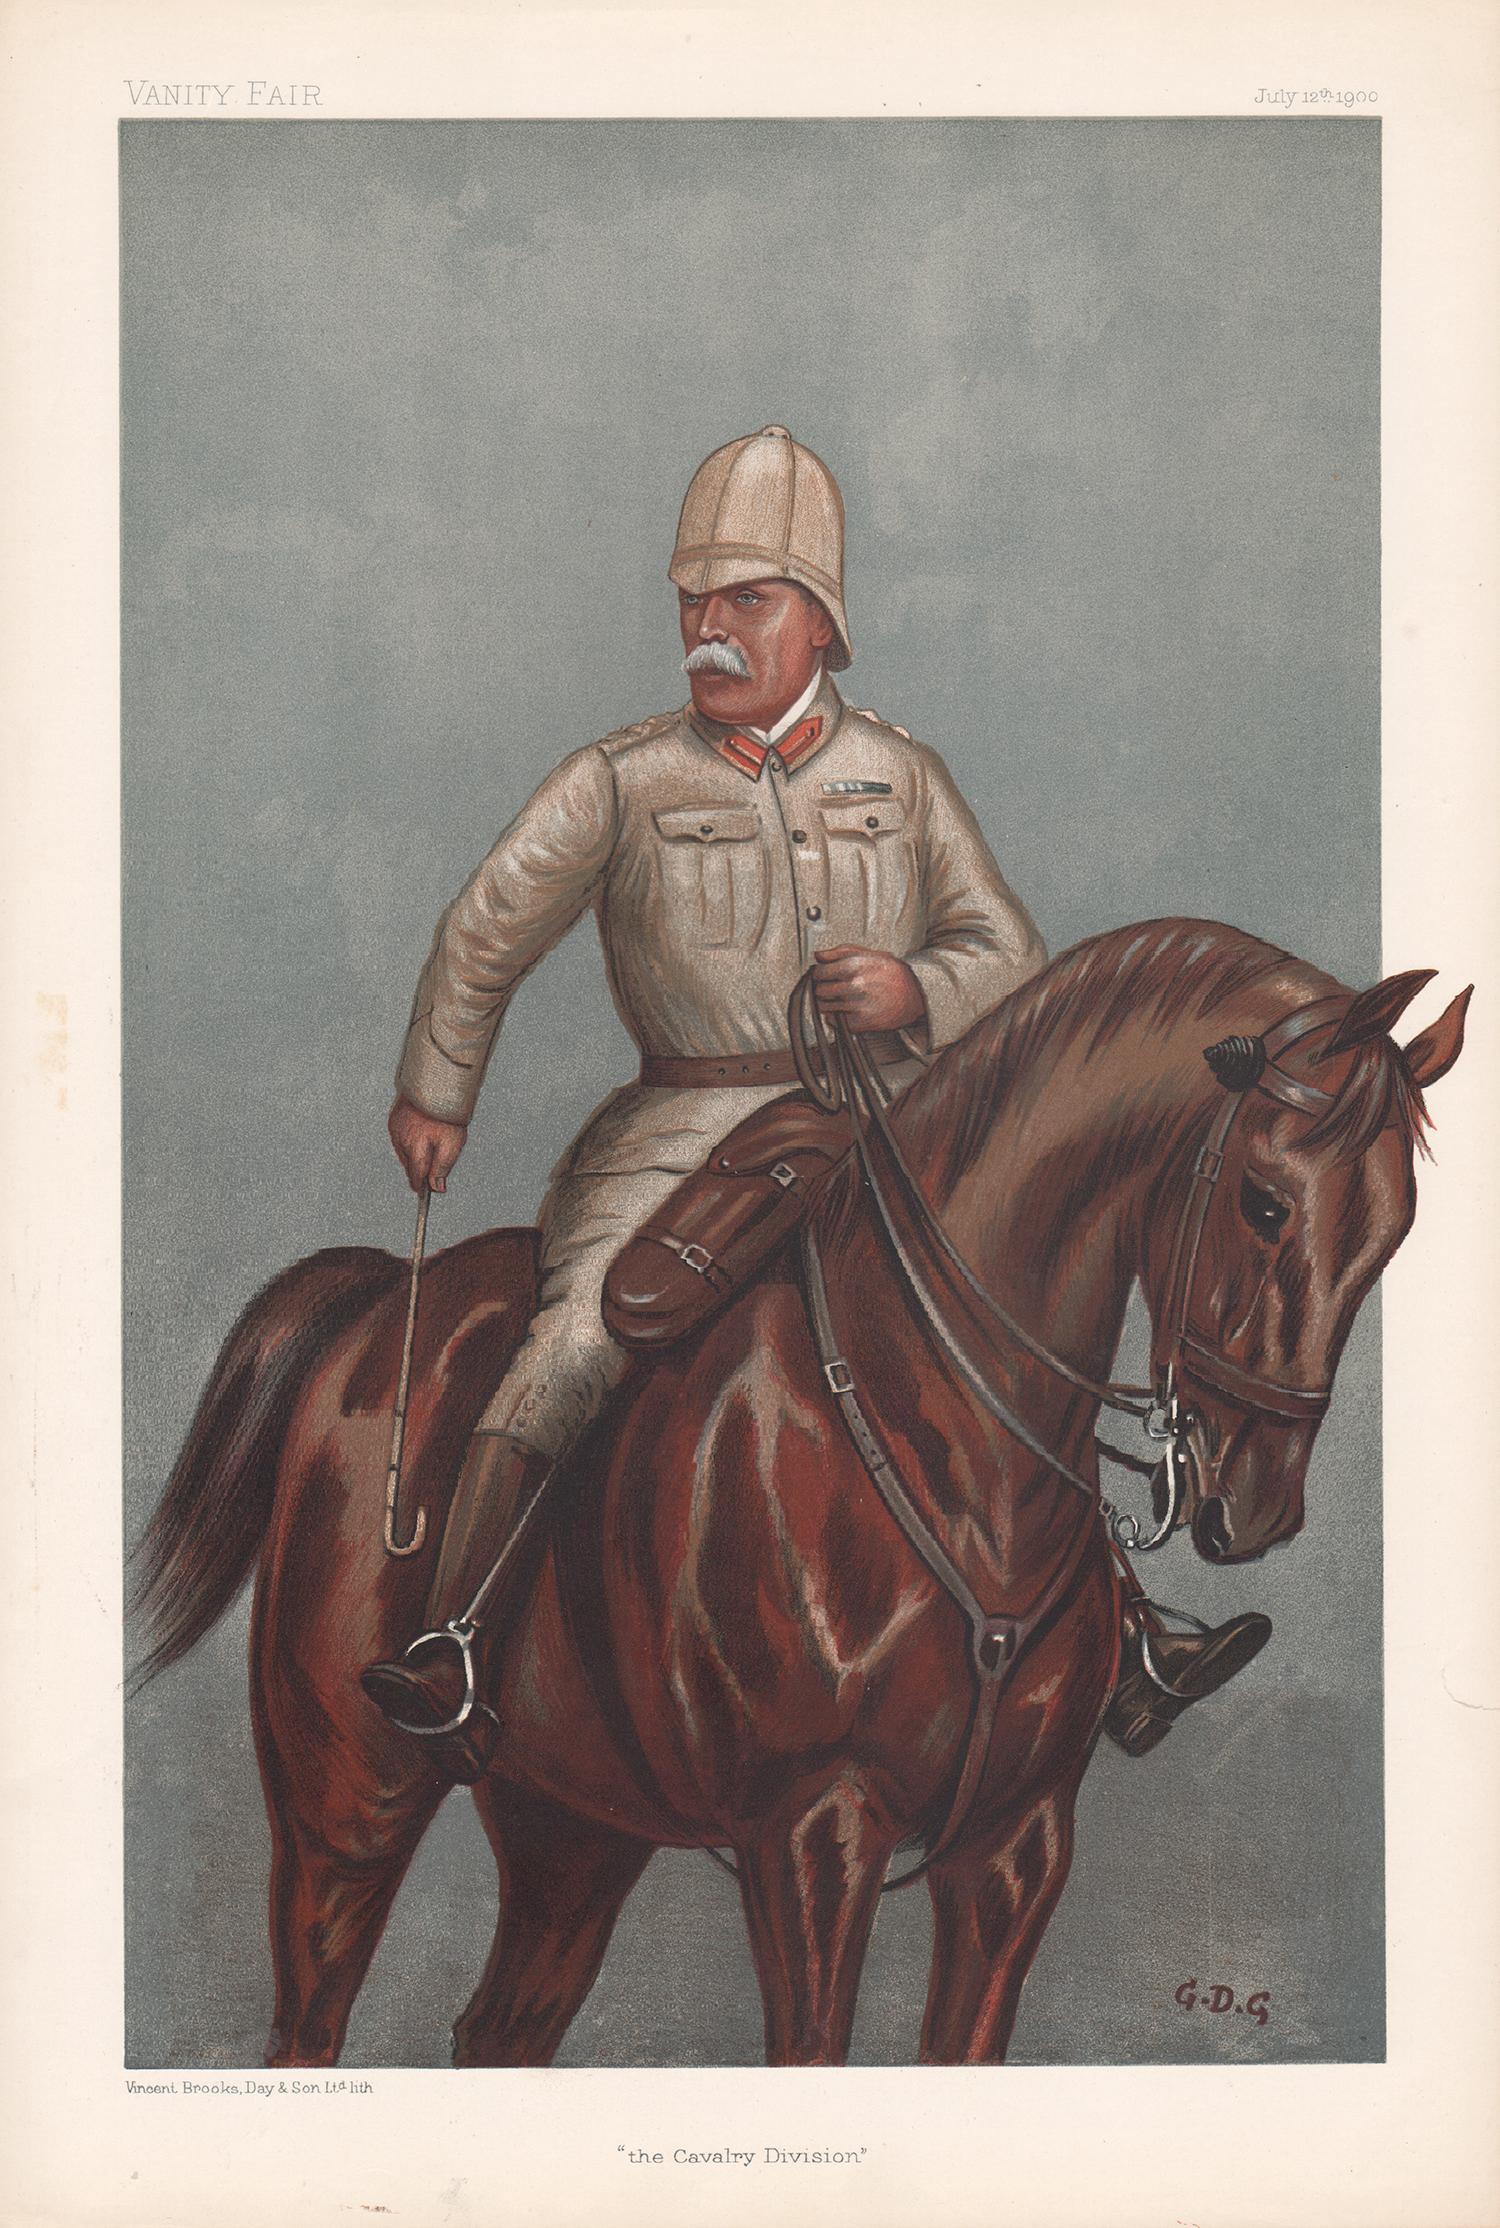 'the Cavalry Division', Vanity Fair military army horse chromolithograph, 1900